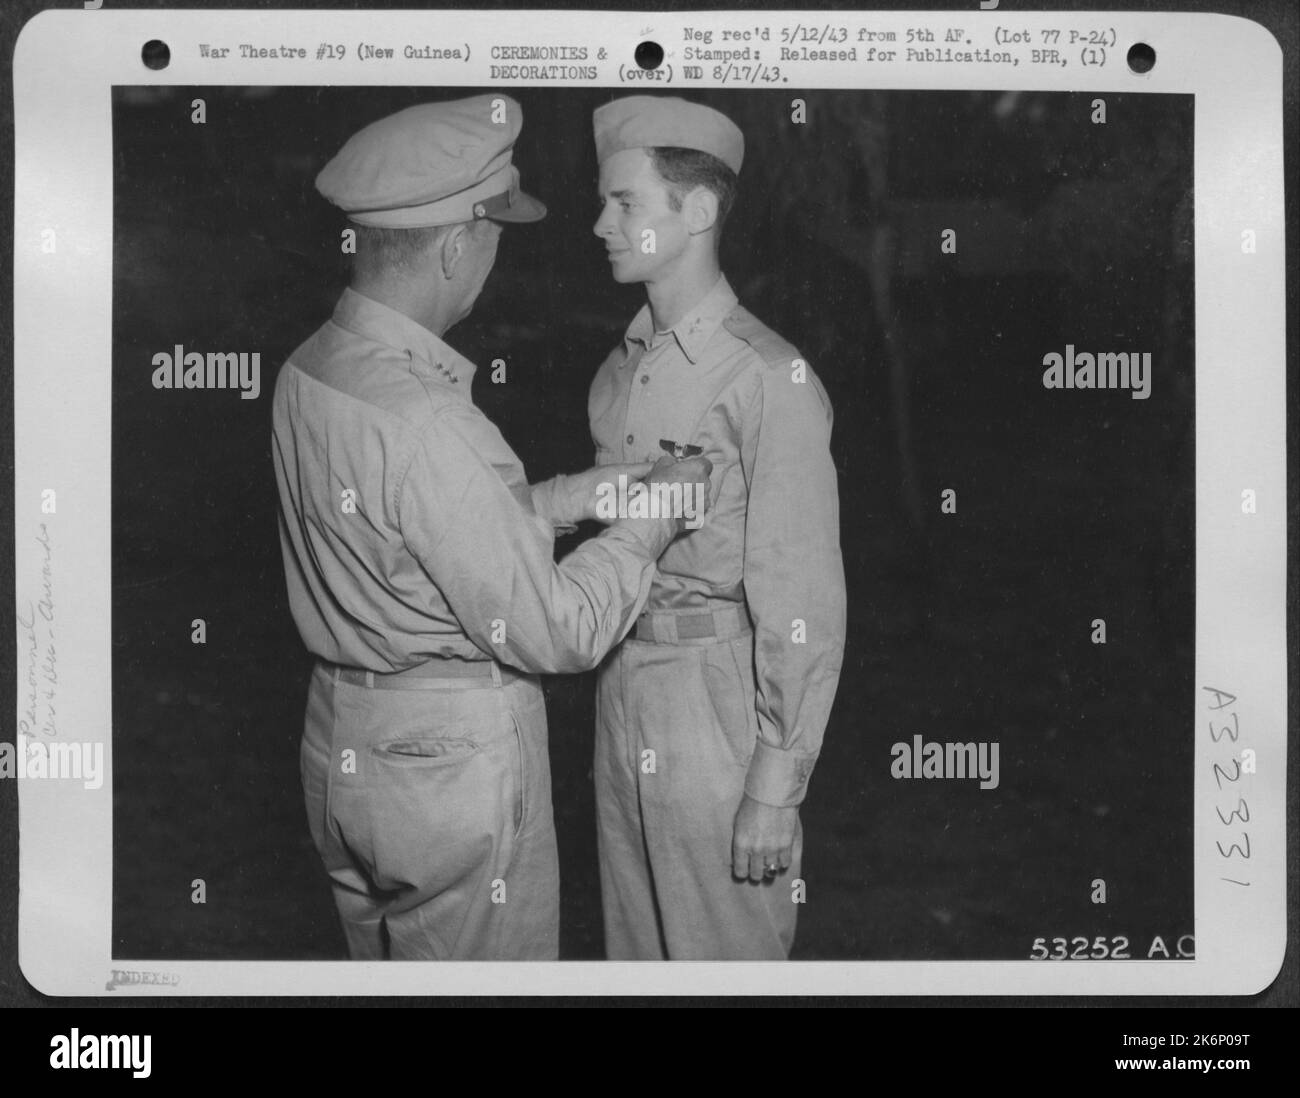 Capt. Curran L. Jones of Columbia, S.C., is pictured being decorated by Lt. General George C. Kenney with the Air Medal and Distinguished Flying Cross, at ceremonies held in New Guinea, on the eve of Jones' departure for the United States and a new Stock Photo